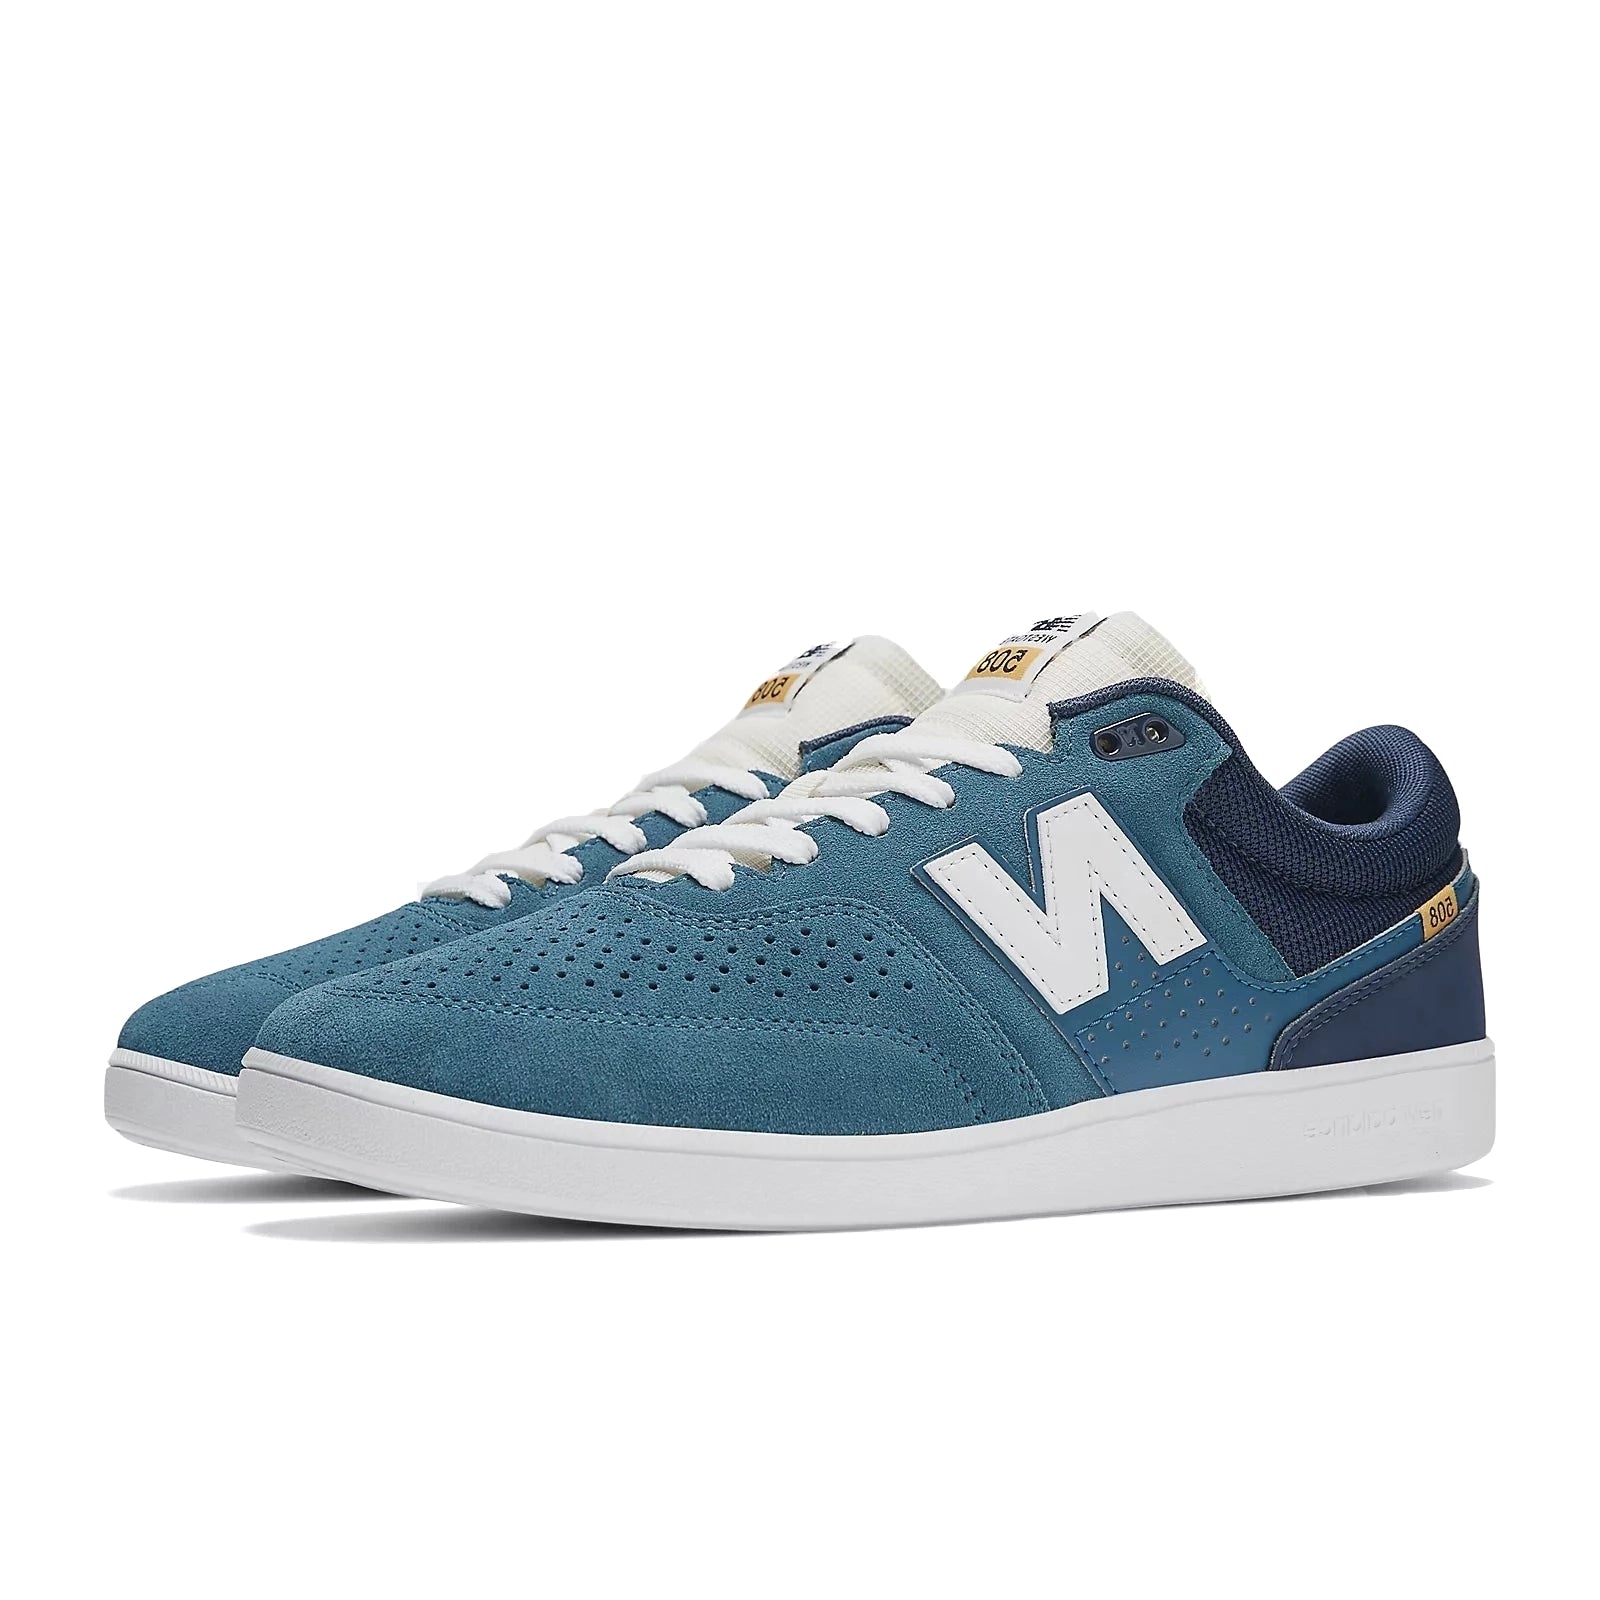 New Balance Numeric Westgate NM508 - Teal/Navy